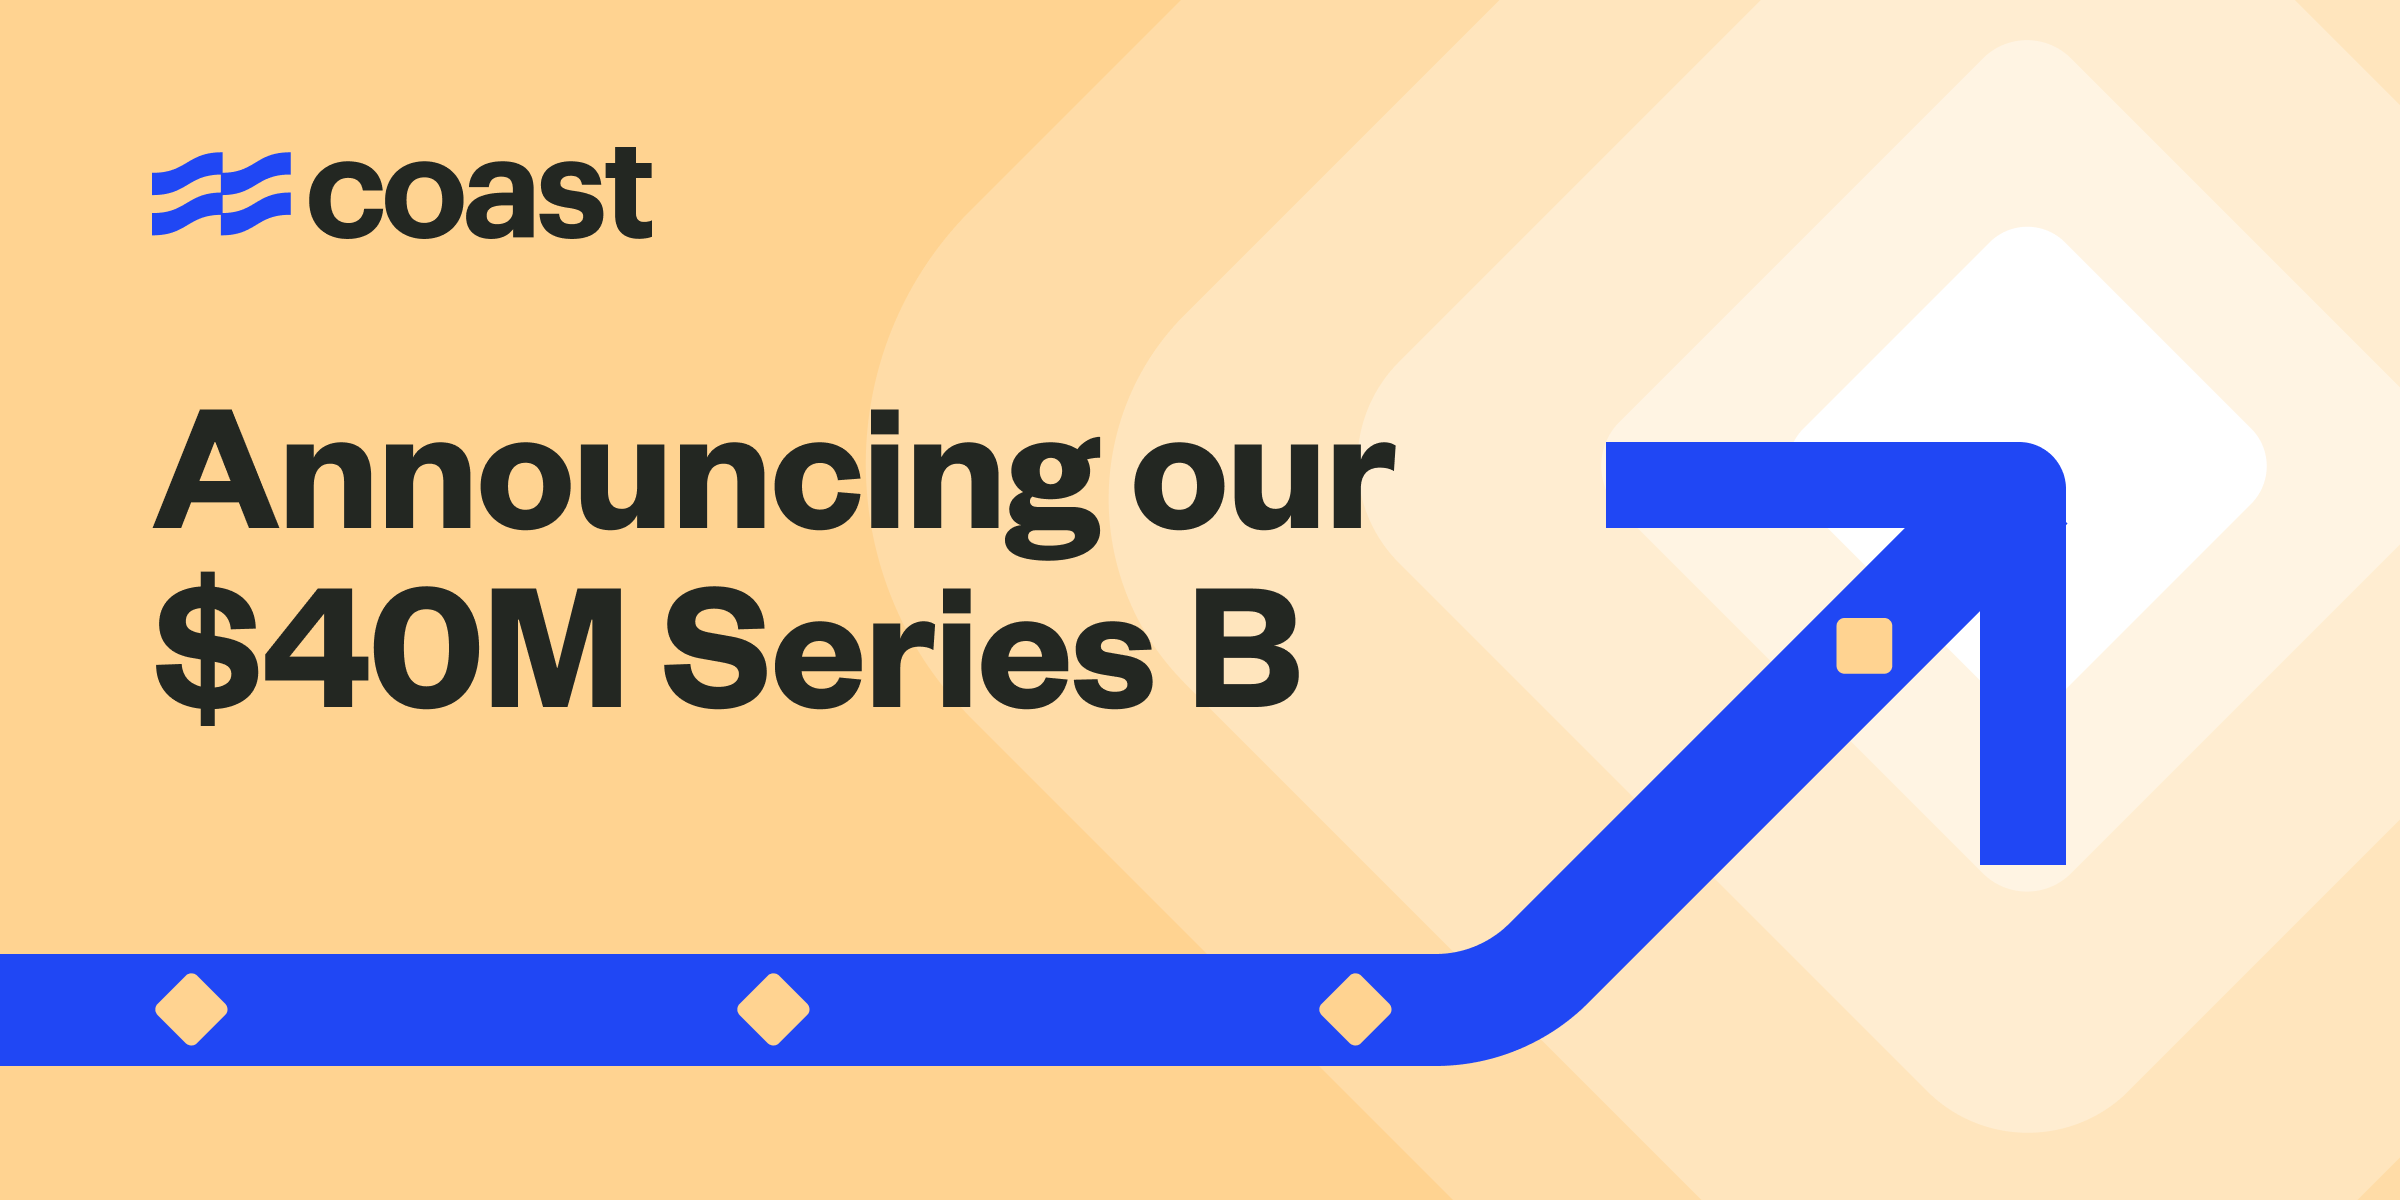 Announcing our Series B funding